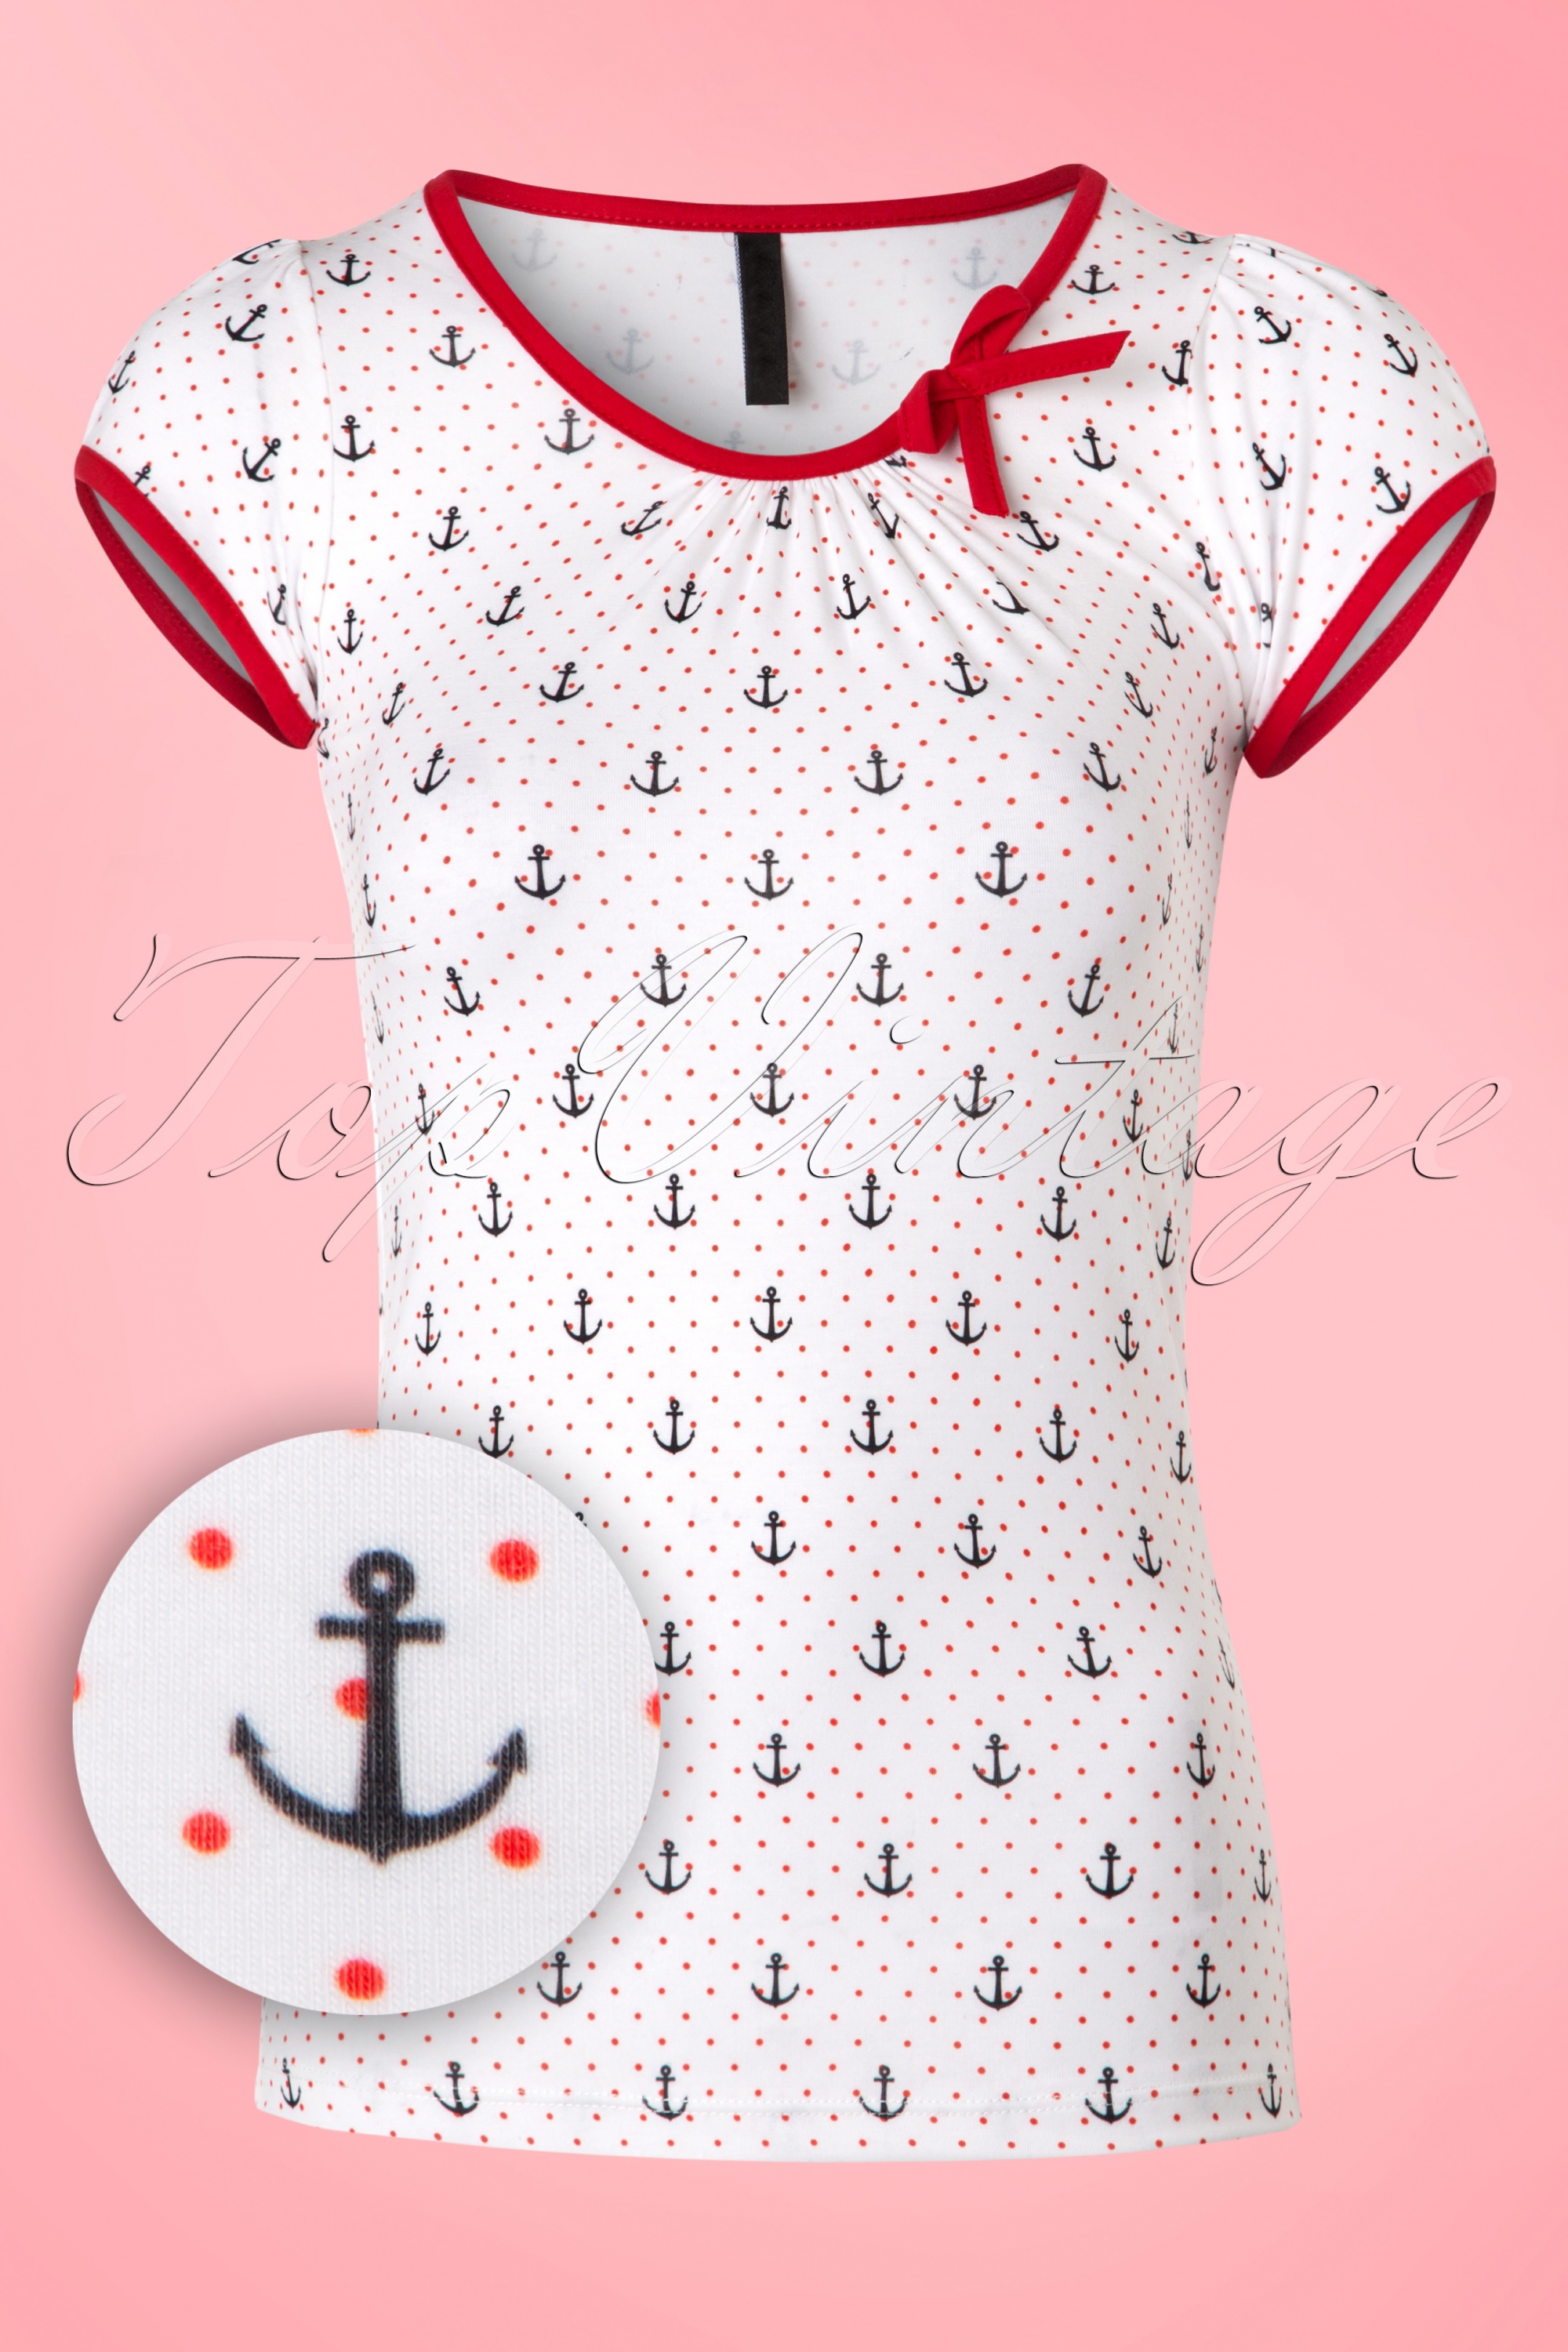 Sassy Sally - Leona Anchor Top in wit en rood